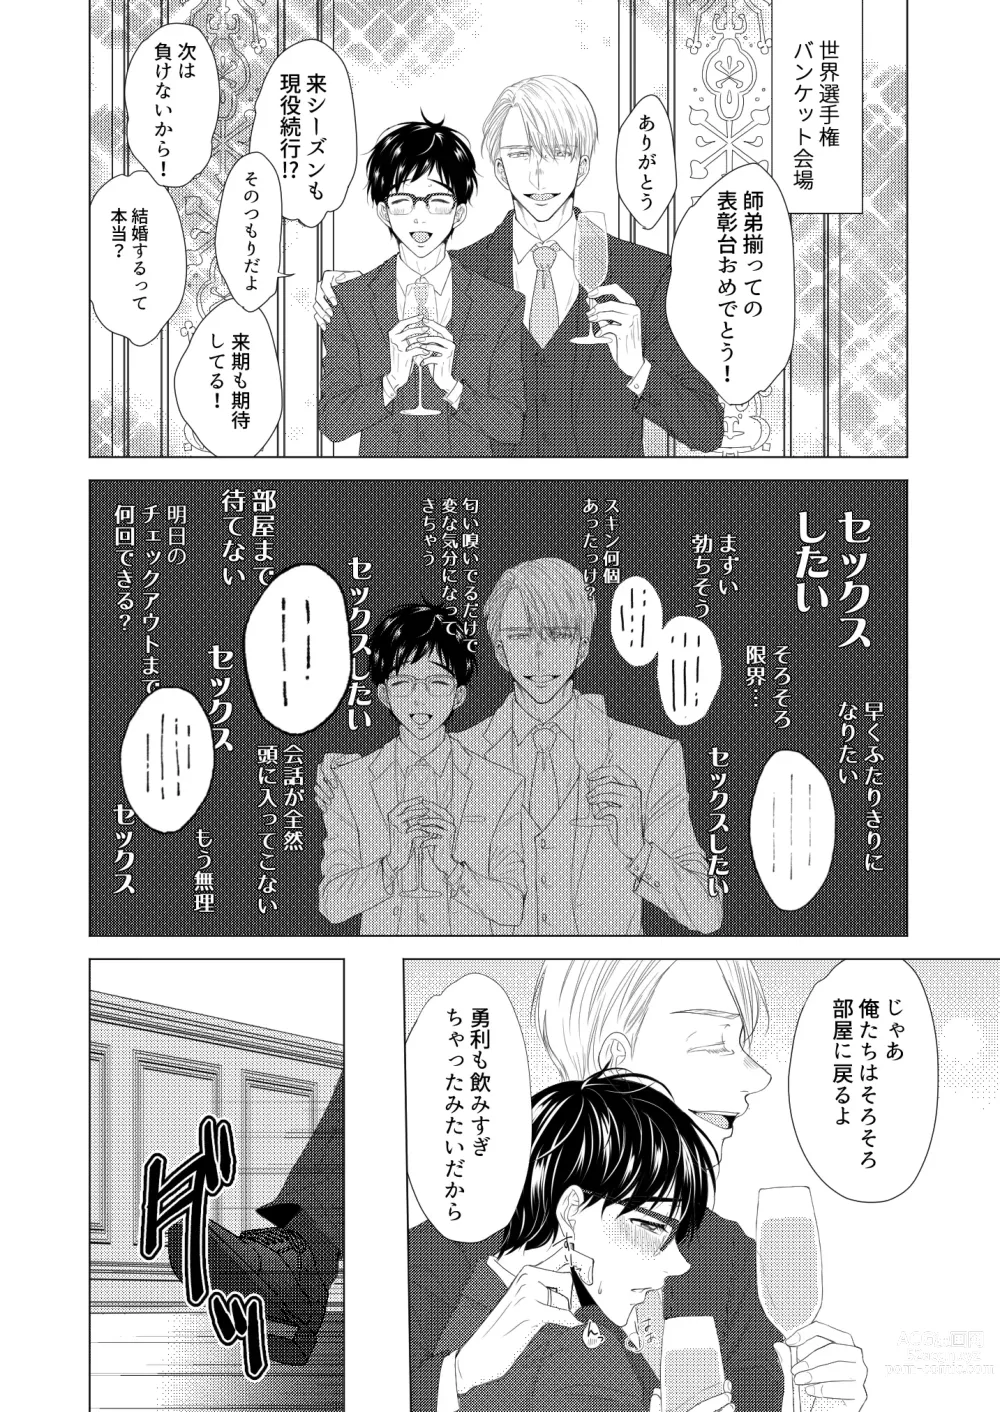 Page 21 of doujinshi Perfect two